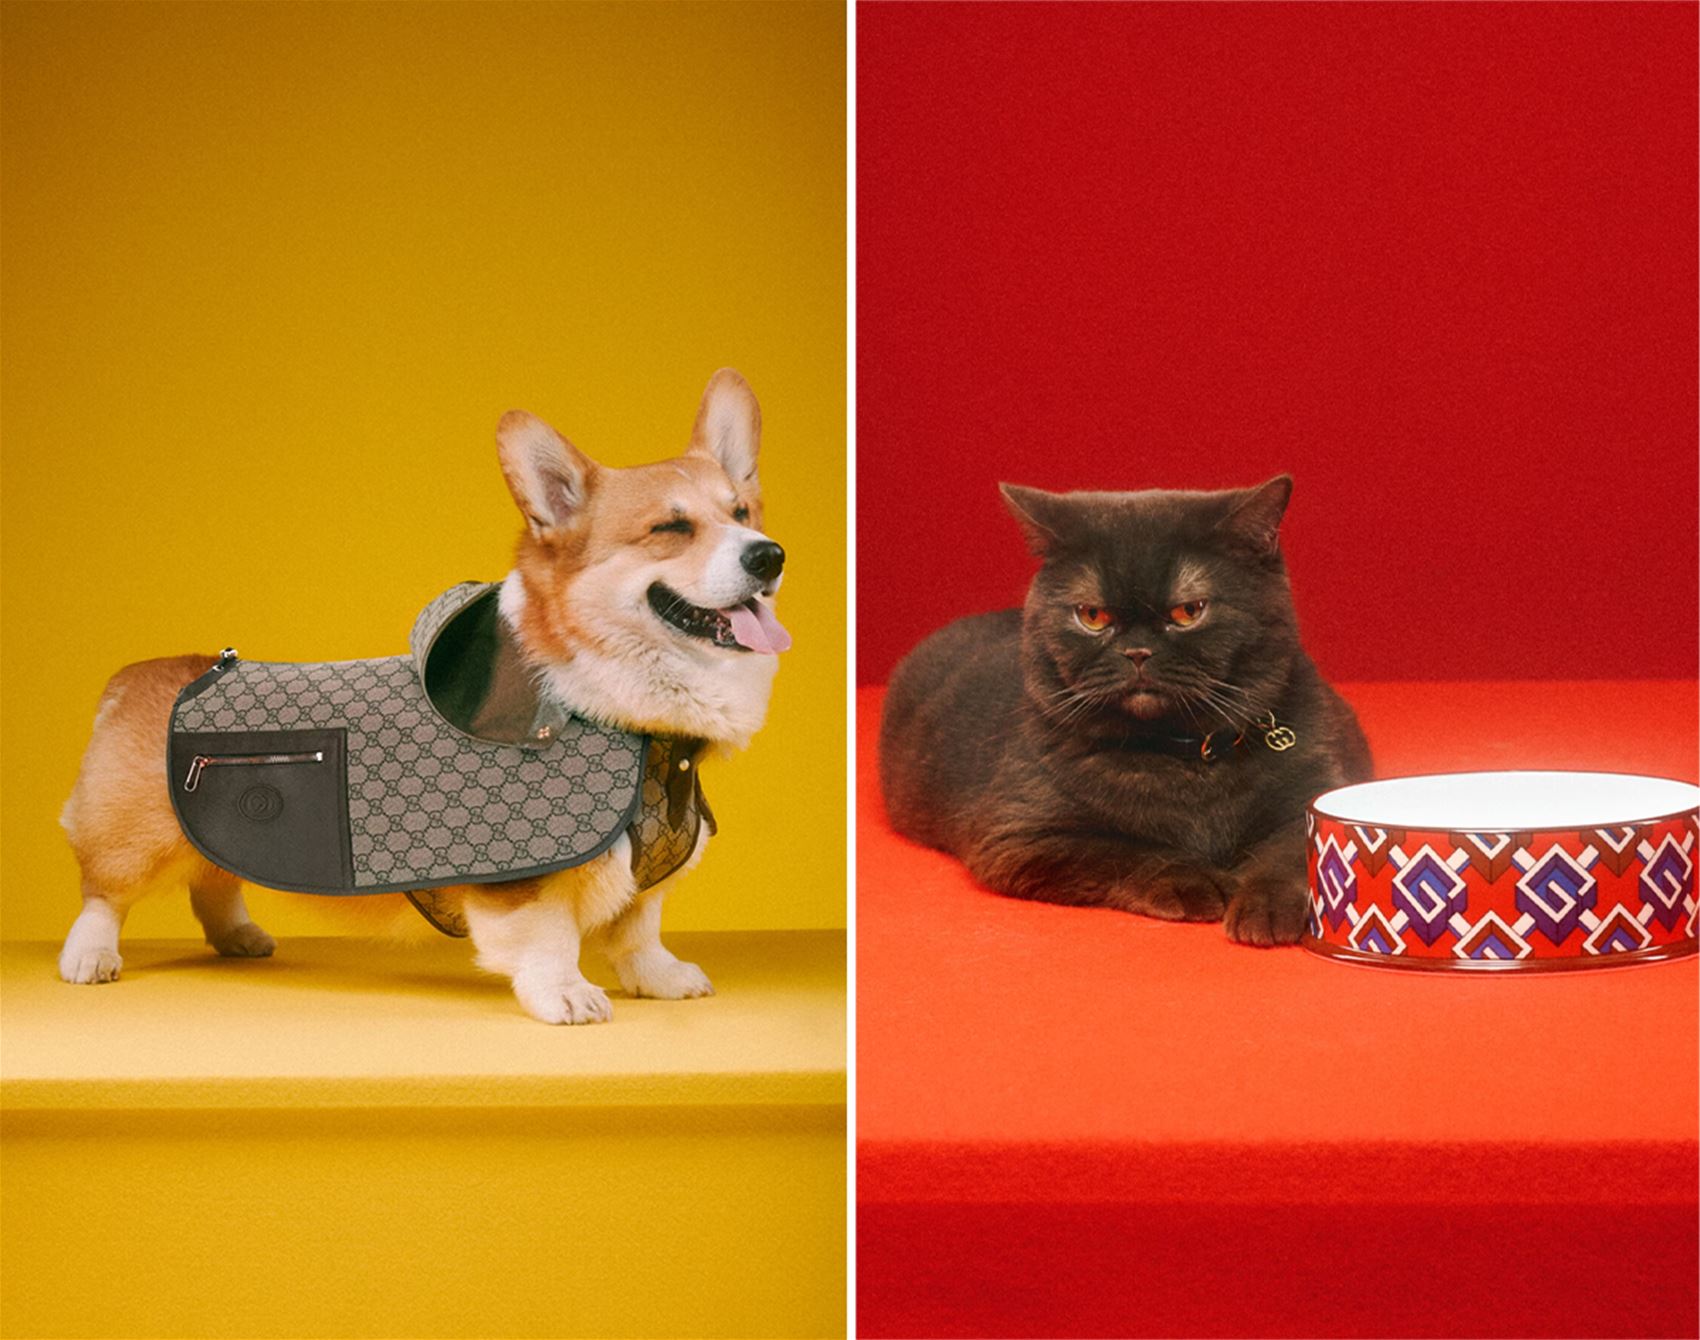 Gucci for pets lands with adorable portraits from Max Siedentopf